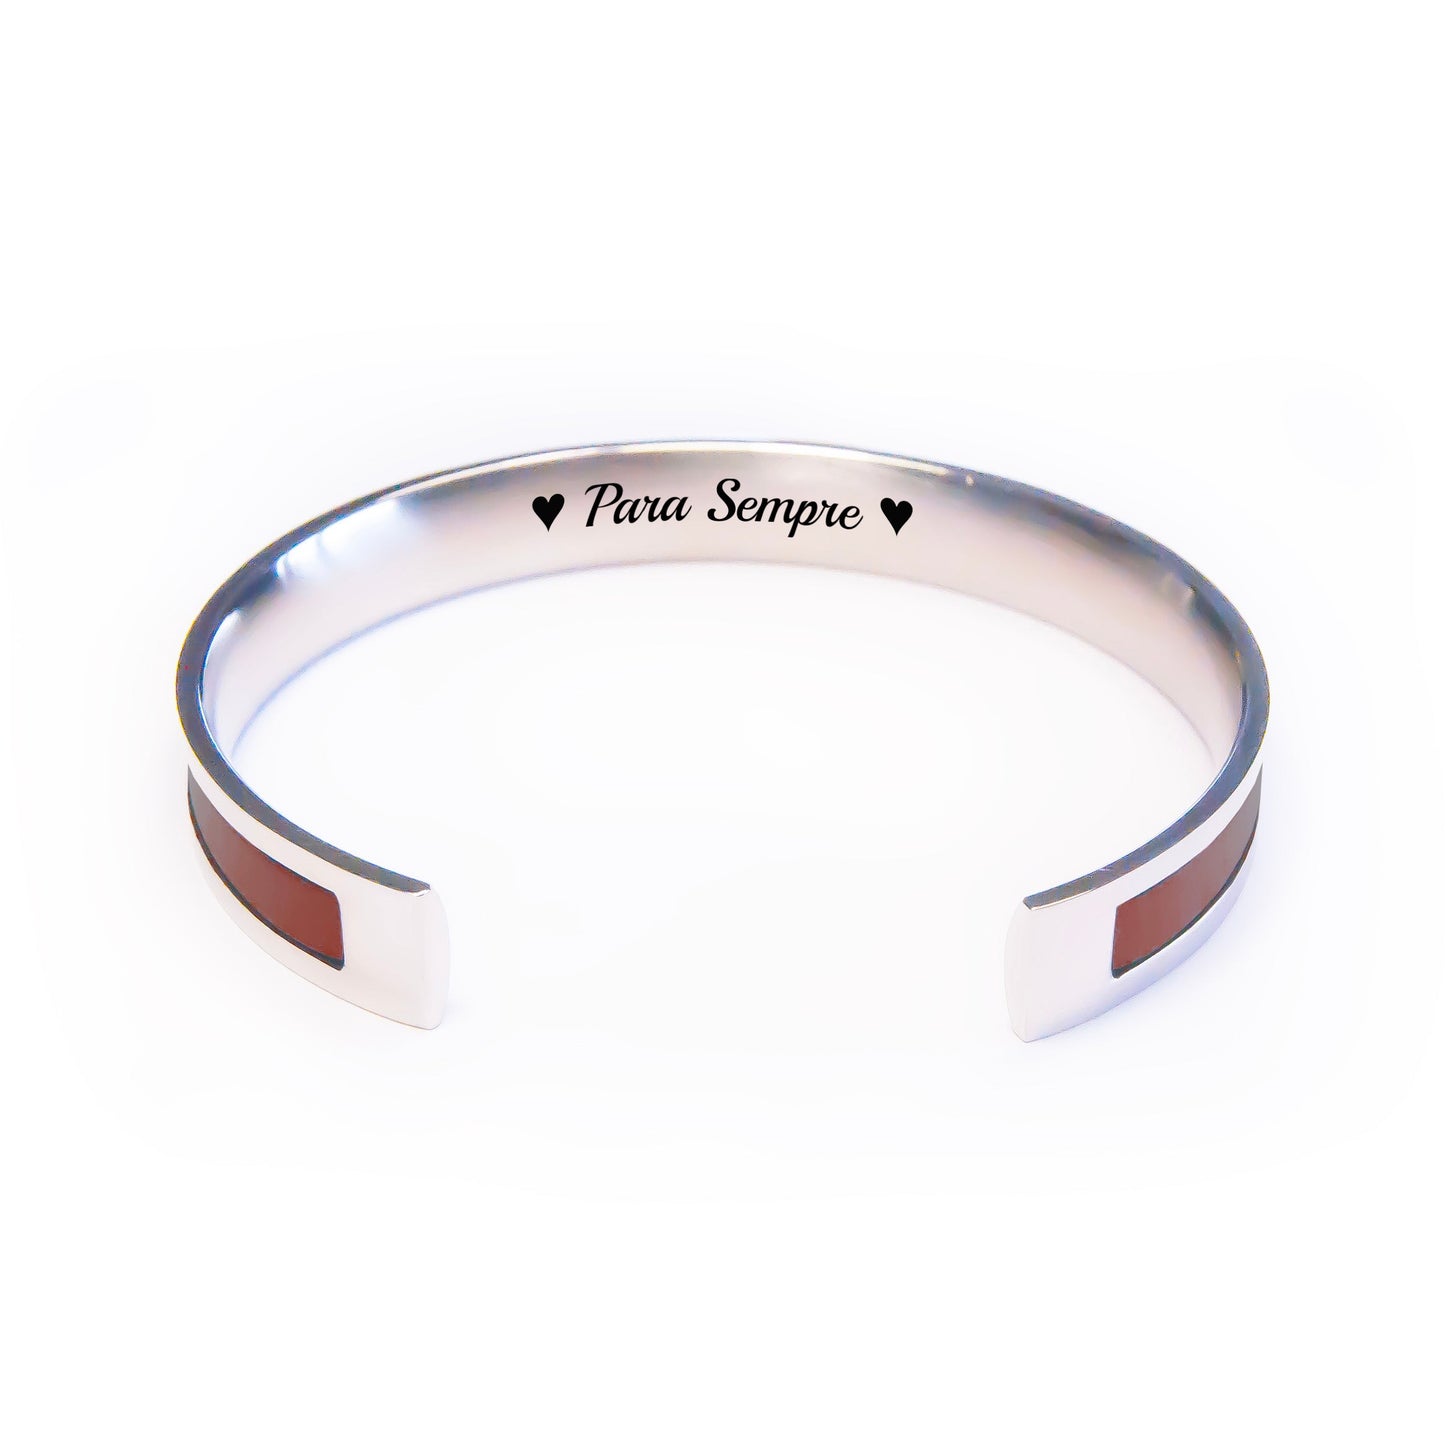 Open Cuff Bracelet for Women Personalized Text Engraved - All Color Options